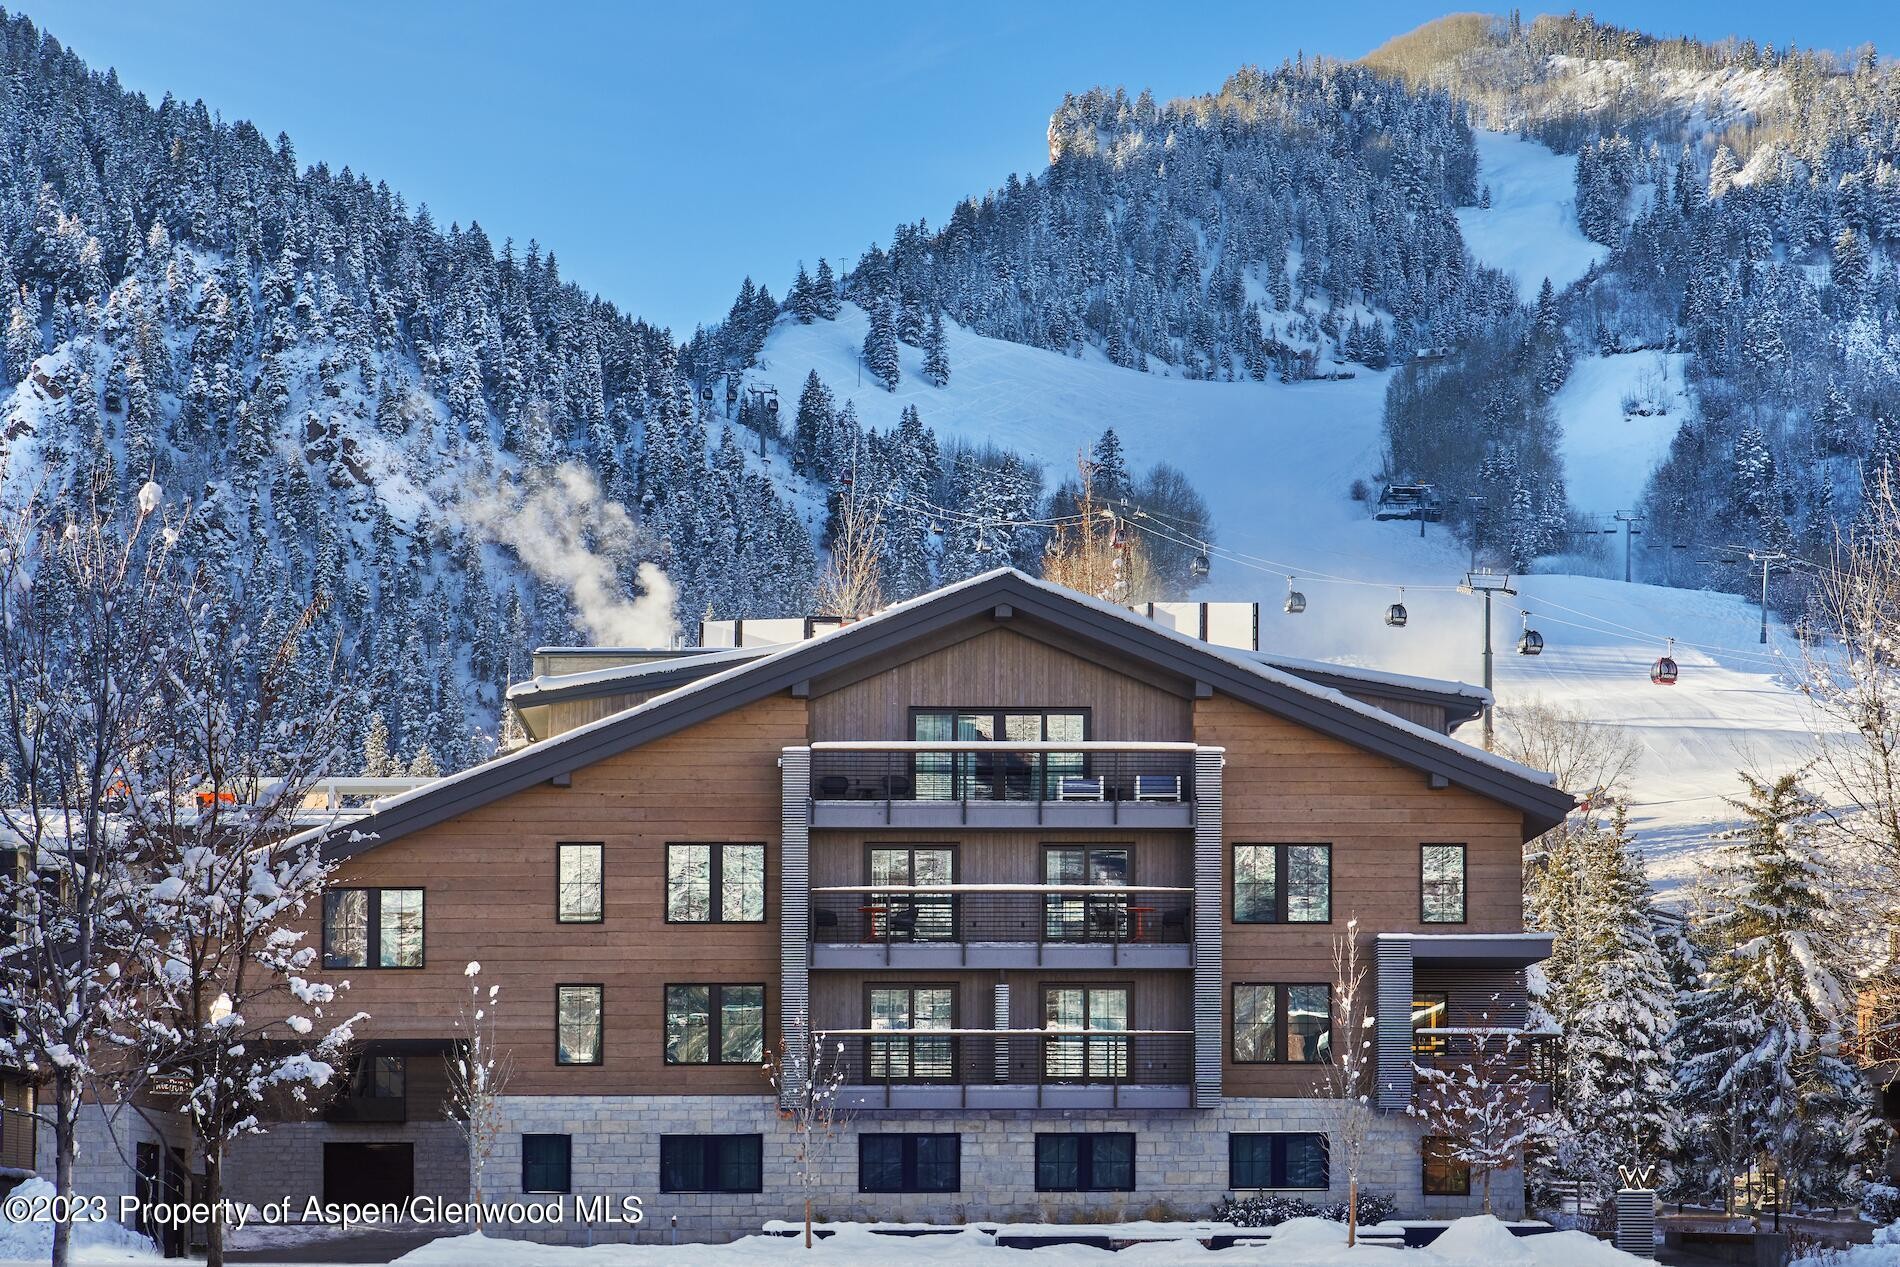 550 S Spring #F2-2 : a Luxury Fractional Ownership Property for Sale - Aspen, Colorado